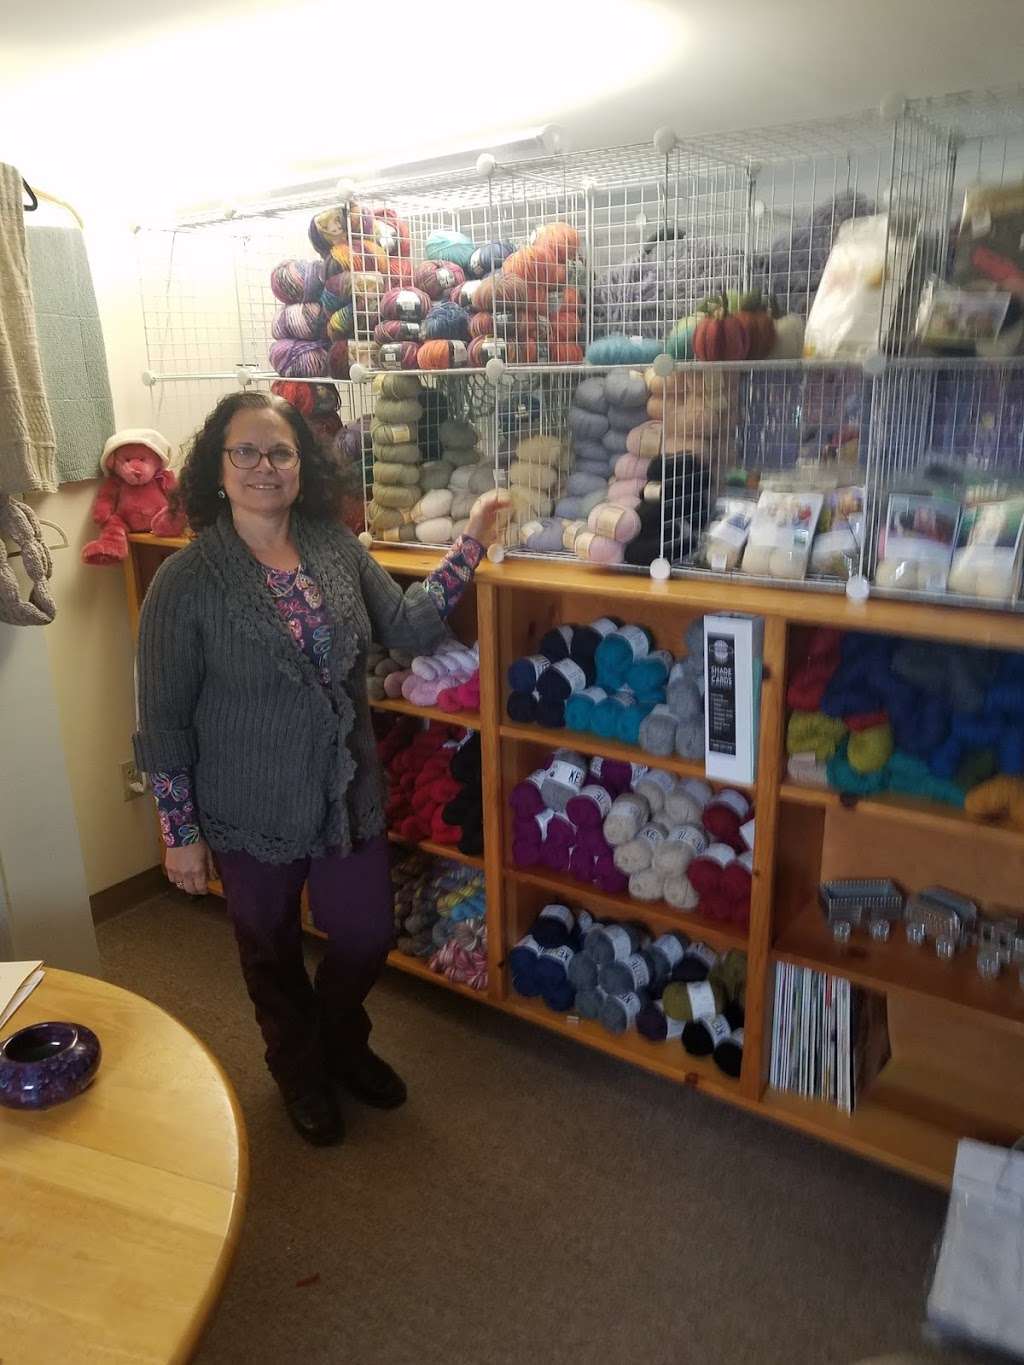 Hooked Knitting | 65 Eastern Ave, Essex, MA 01929 | Phone: (978) 768-7329